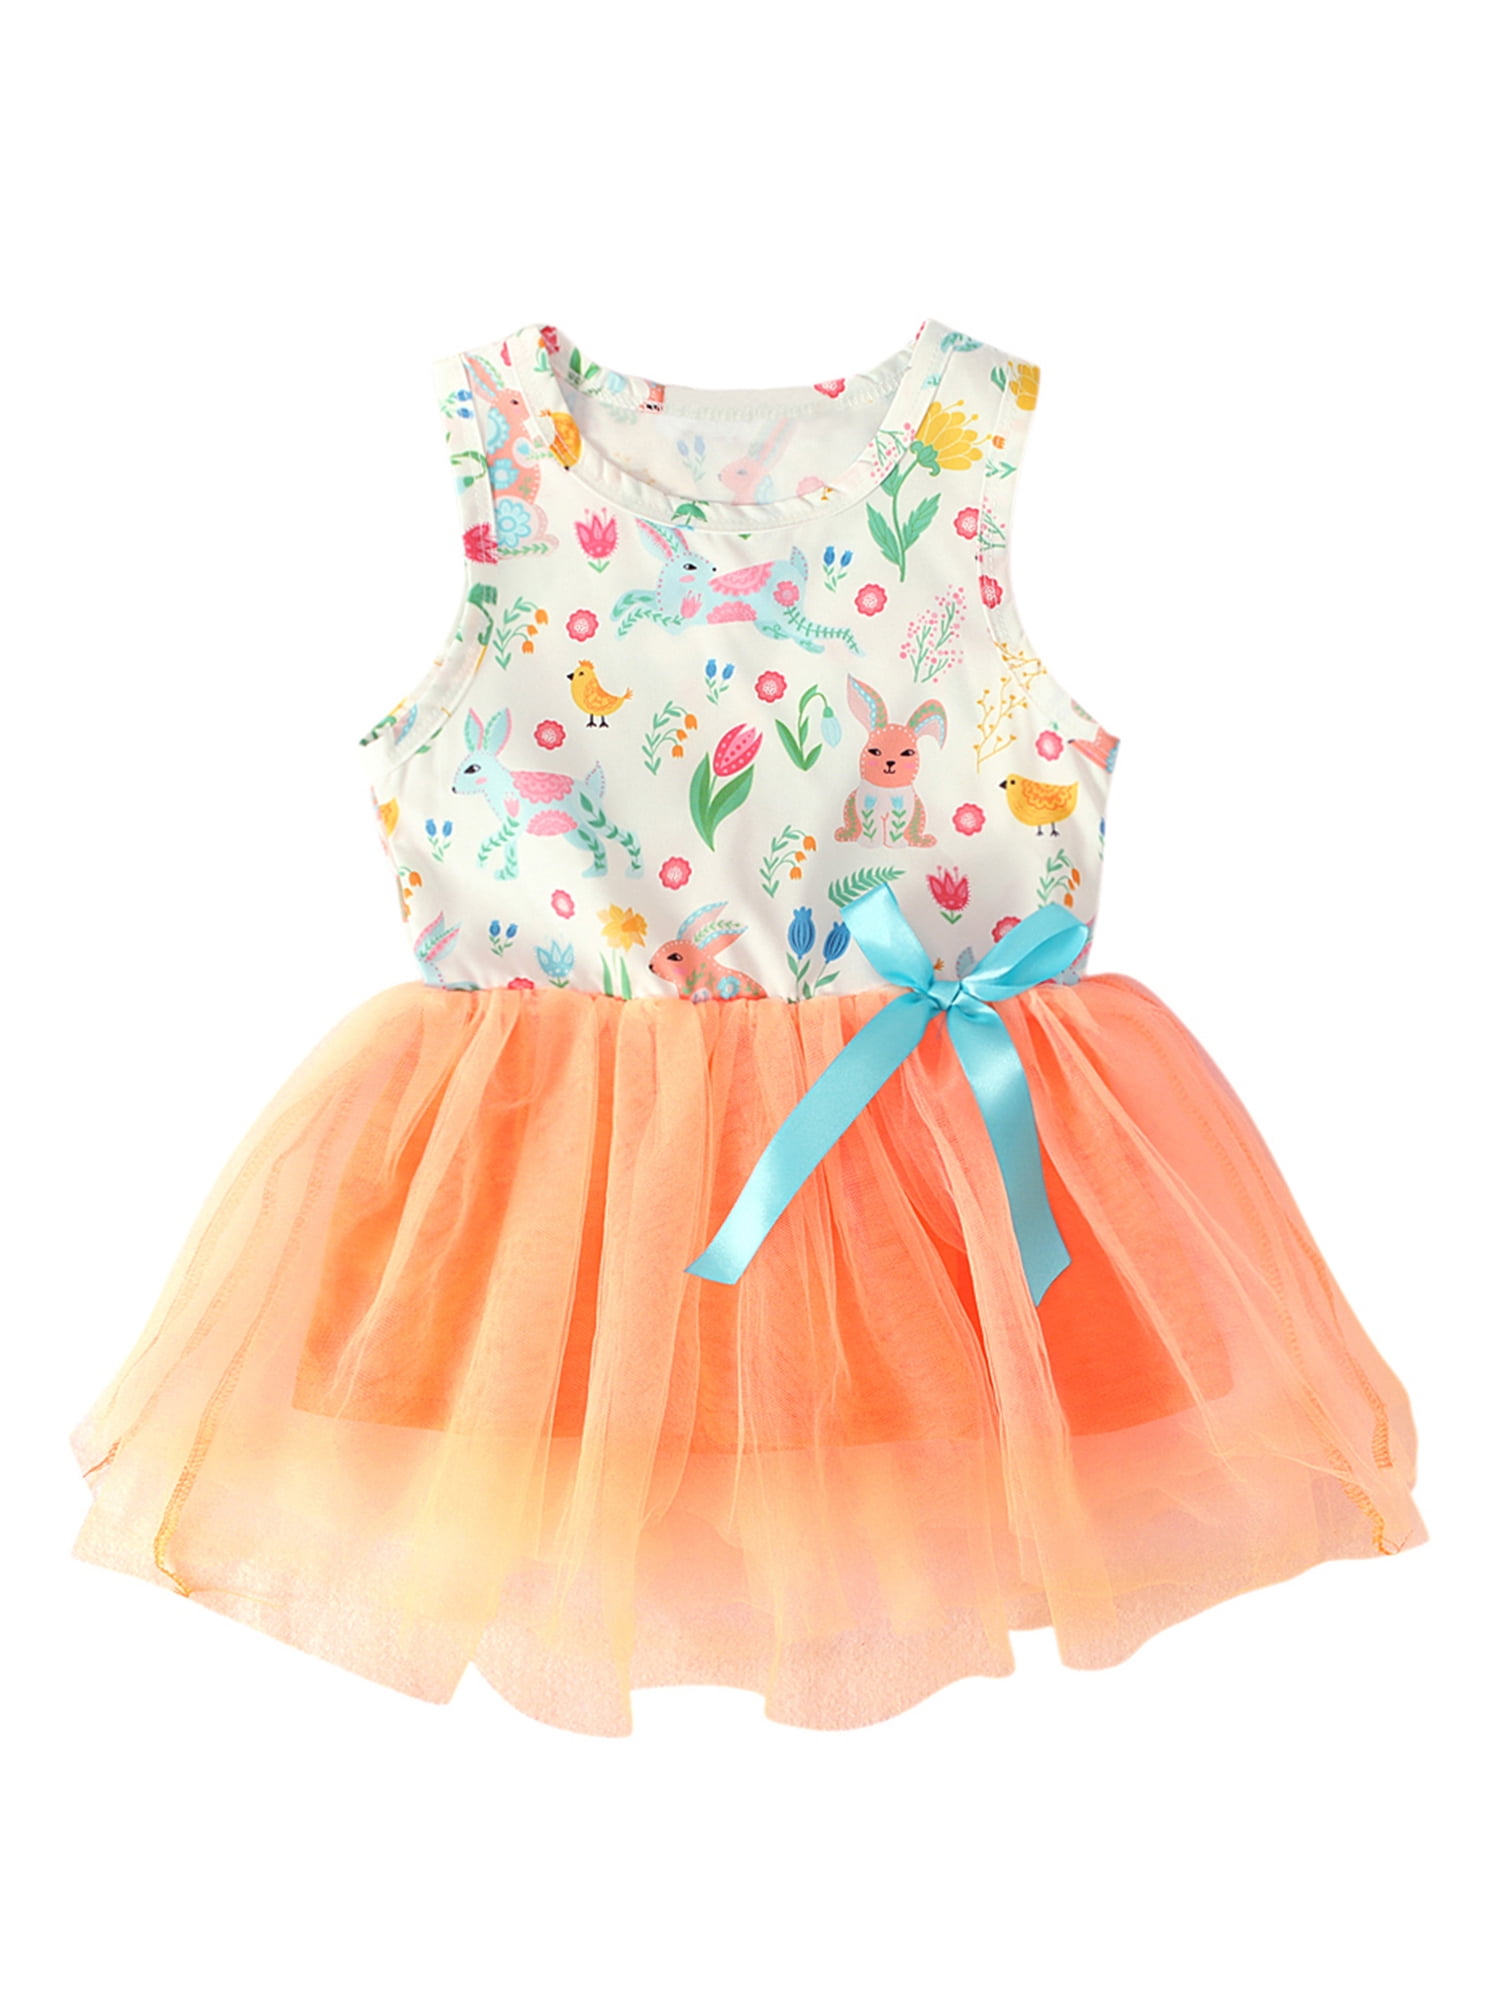 US Baby Girl Easter Bunny Dress Floral Party Outfit Princess Tulle Tutu Sundress